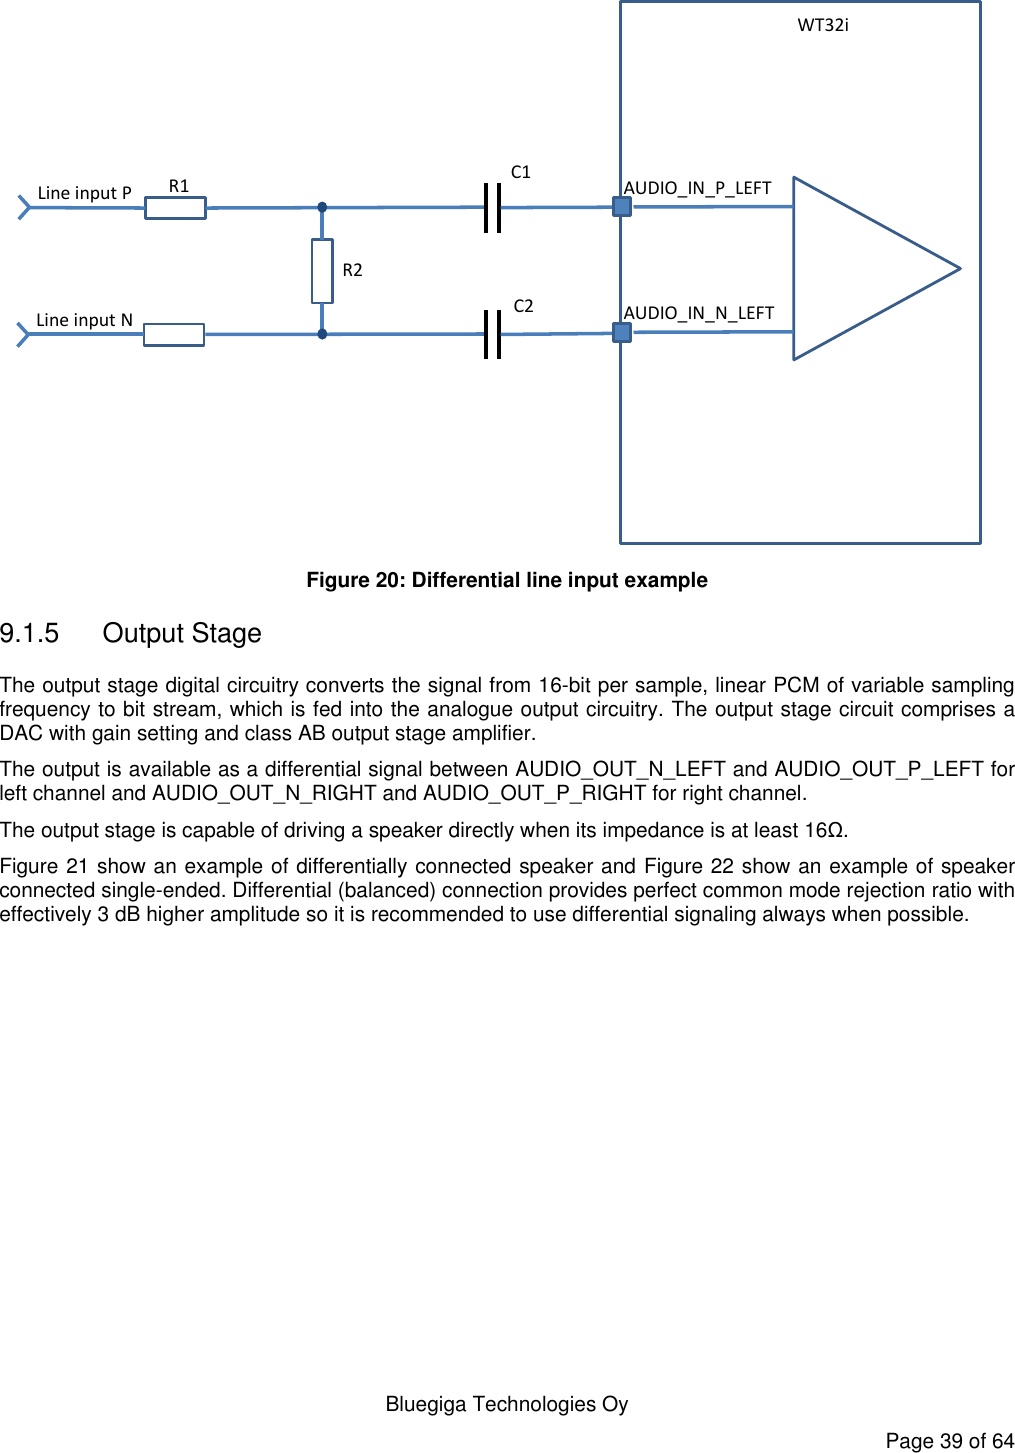   Bluegiga Technologies Oy Page 39 of 64 R1R2C1C2WT32iAUDIO_IN_N_LEFTAUDIO_IN_P_LEFTLine input PLine input N Figure 20: Differential line input example 9.1.5  Output Stage The output stage digital circuitry converts the signal from 16-bit per sample, linear PCM of variable sampling frequency to bit stream, which is fed into the analogue output circuitry. The output stage circuit comprises a DAC with gain setting and class AB output stage amplifier.  The output is available as a differential signal between AUDIO_OUT_N_LEFT and AUDIO_OUT_P_LEFT for left channel and AUDIO_OUT_N_RIGHT and AUDIO_OUT_P_RIGHT for right channel. The output stage is capable of driving a speaker directly when its impedance is at least 16Ω.  Figure 21 show an example of differentially connected speaker and Figure 22 show an example of speaker connected single-ended. Differential (balanced) connection provides perfect common mode rejection ratio with effectively 3 dB higher amplitude so it is recommended to use differential signaling always when possible.  